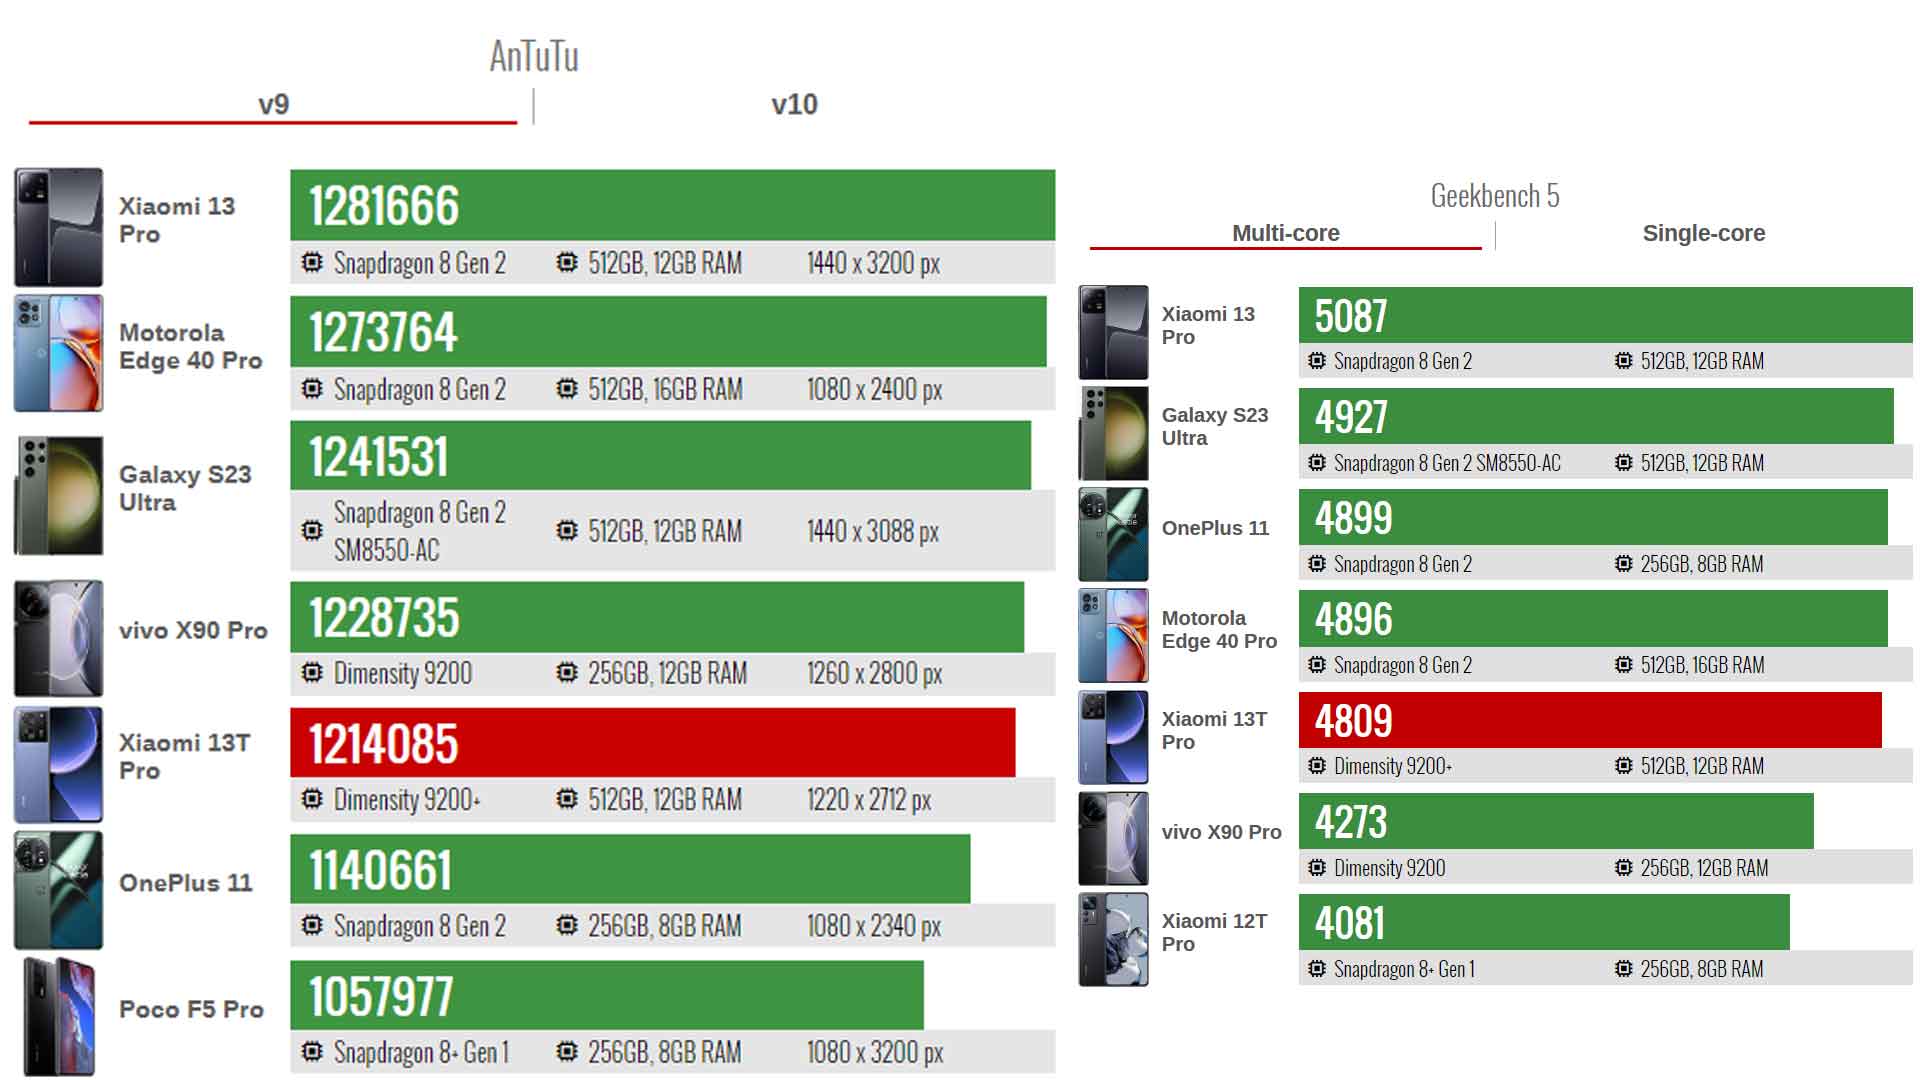 xiaomi 13t pro review Geekbench and Antutu benchmark scores